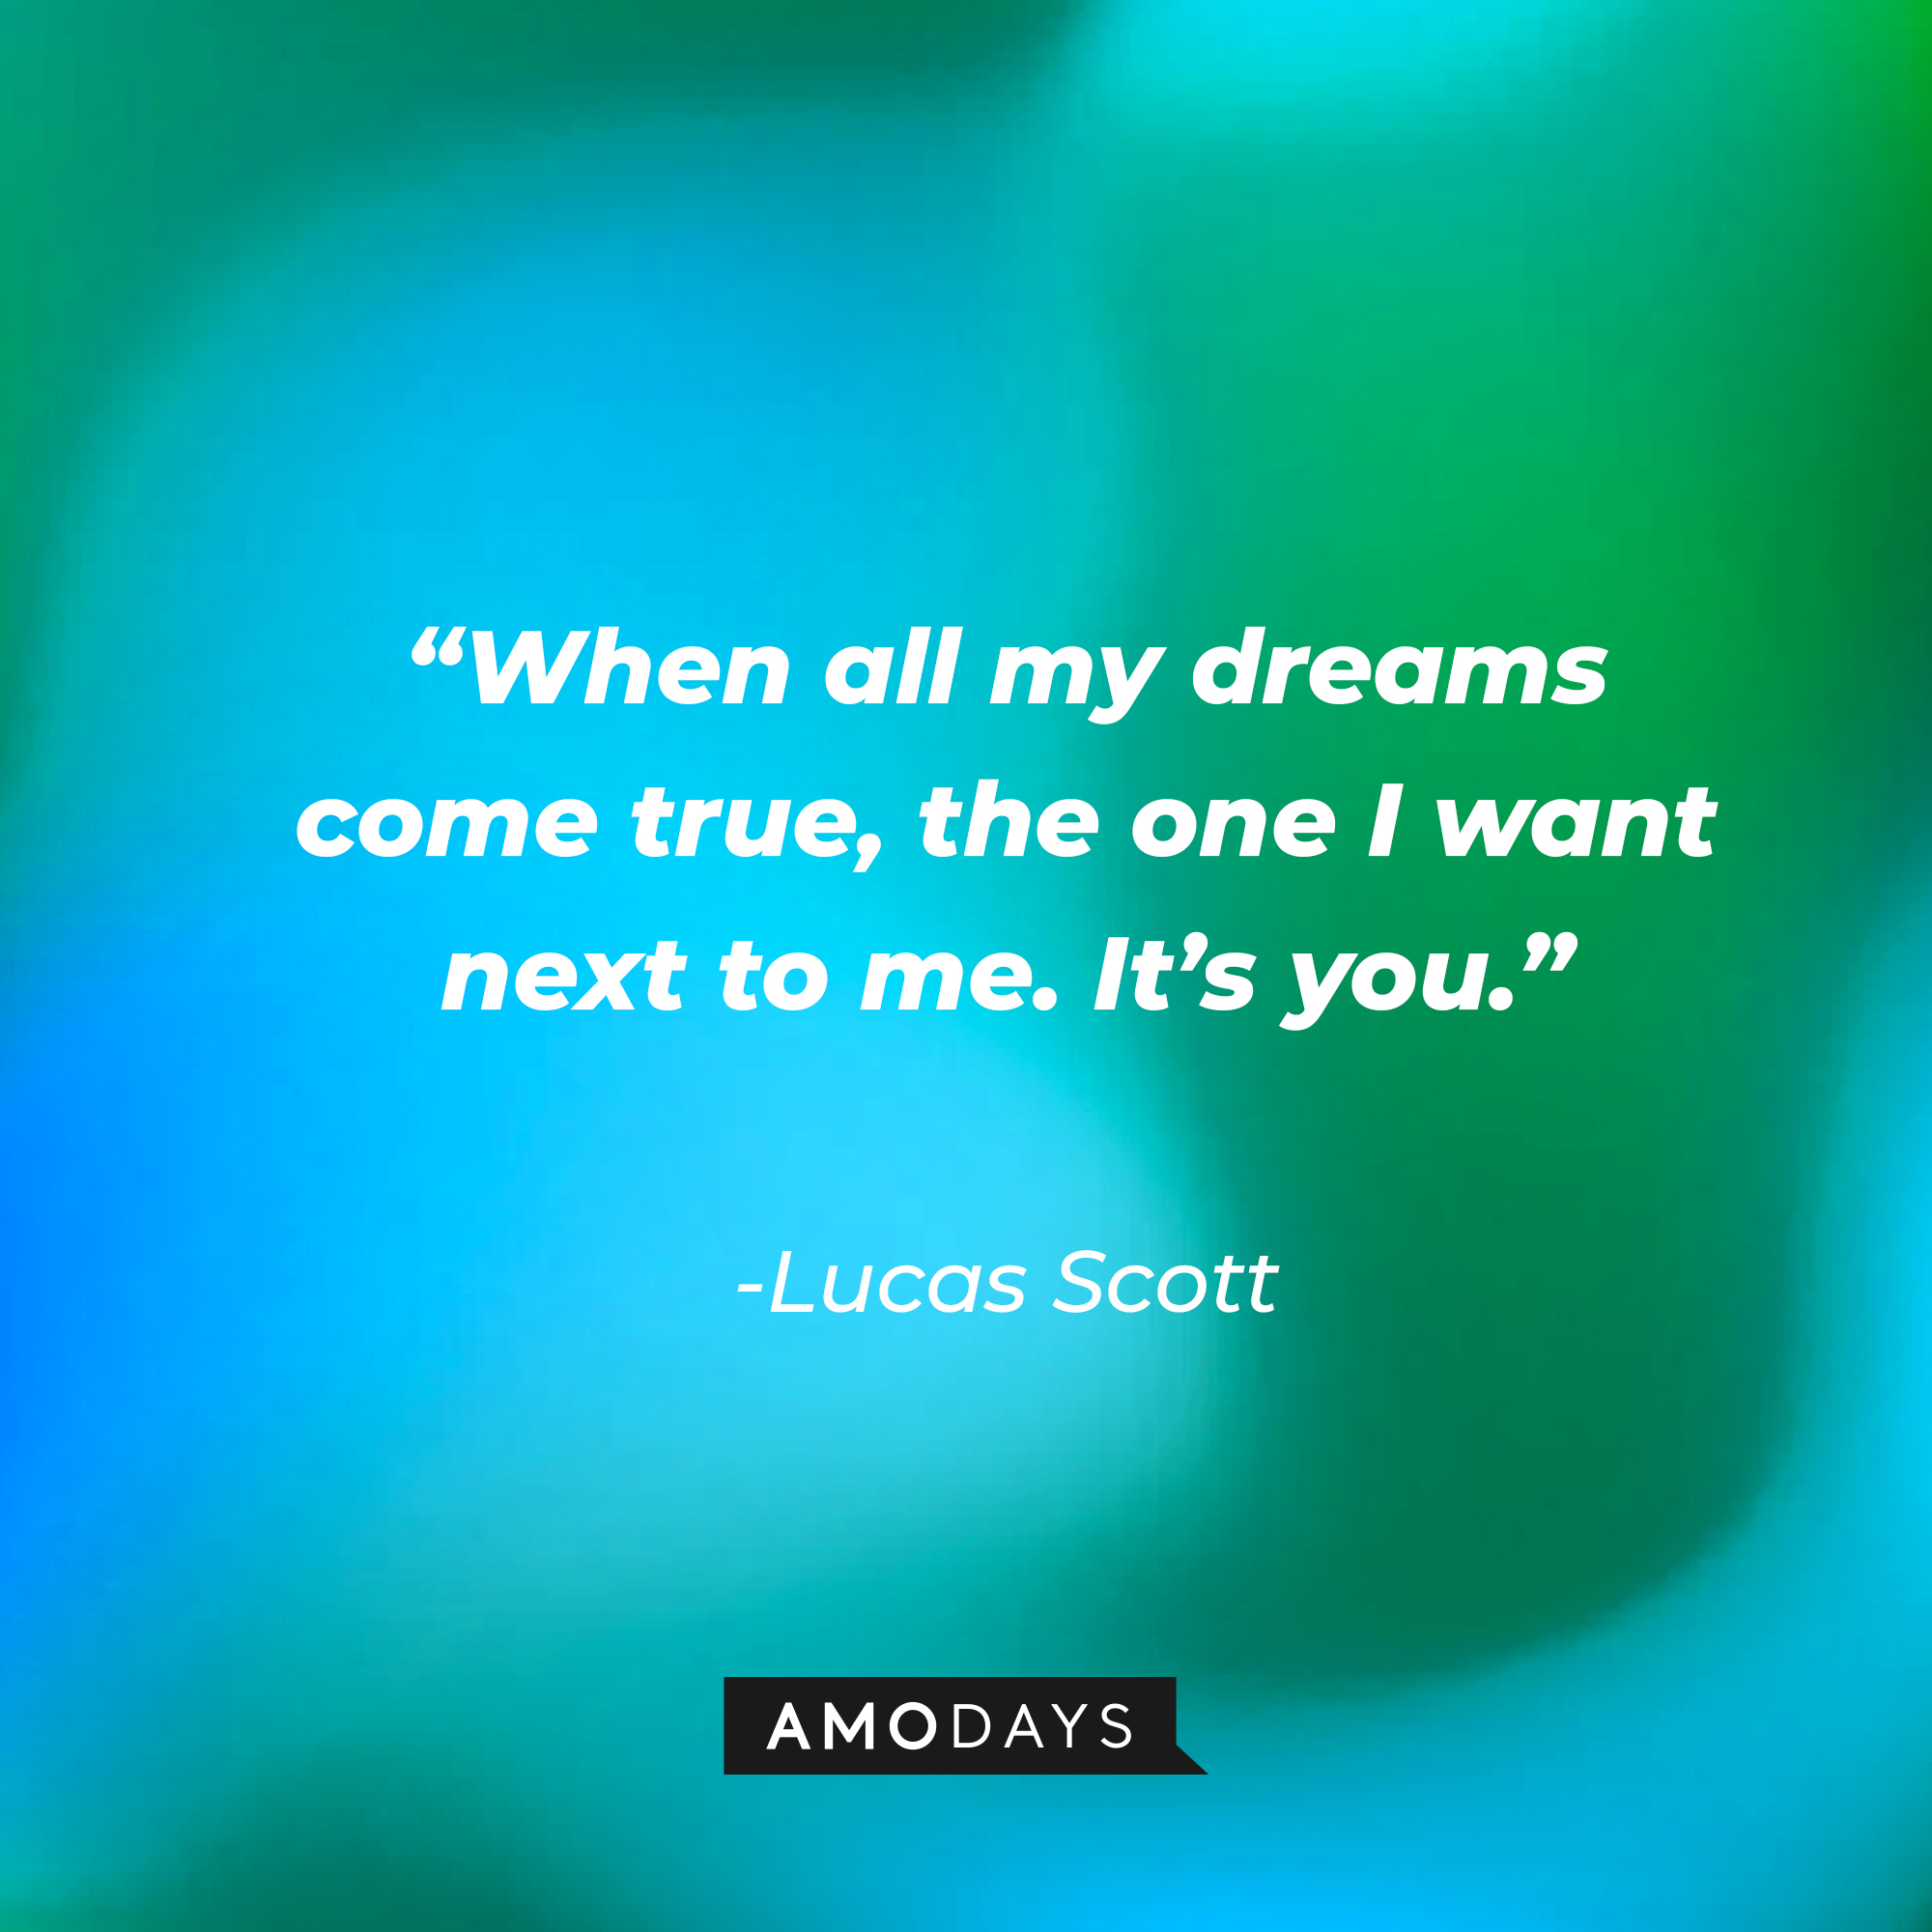 Lucas Scott’s quote: “When all my dreams come true, the one I want next to me. It’s you.” | Source: AmoDays